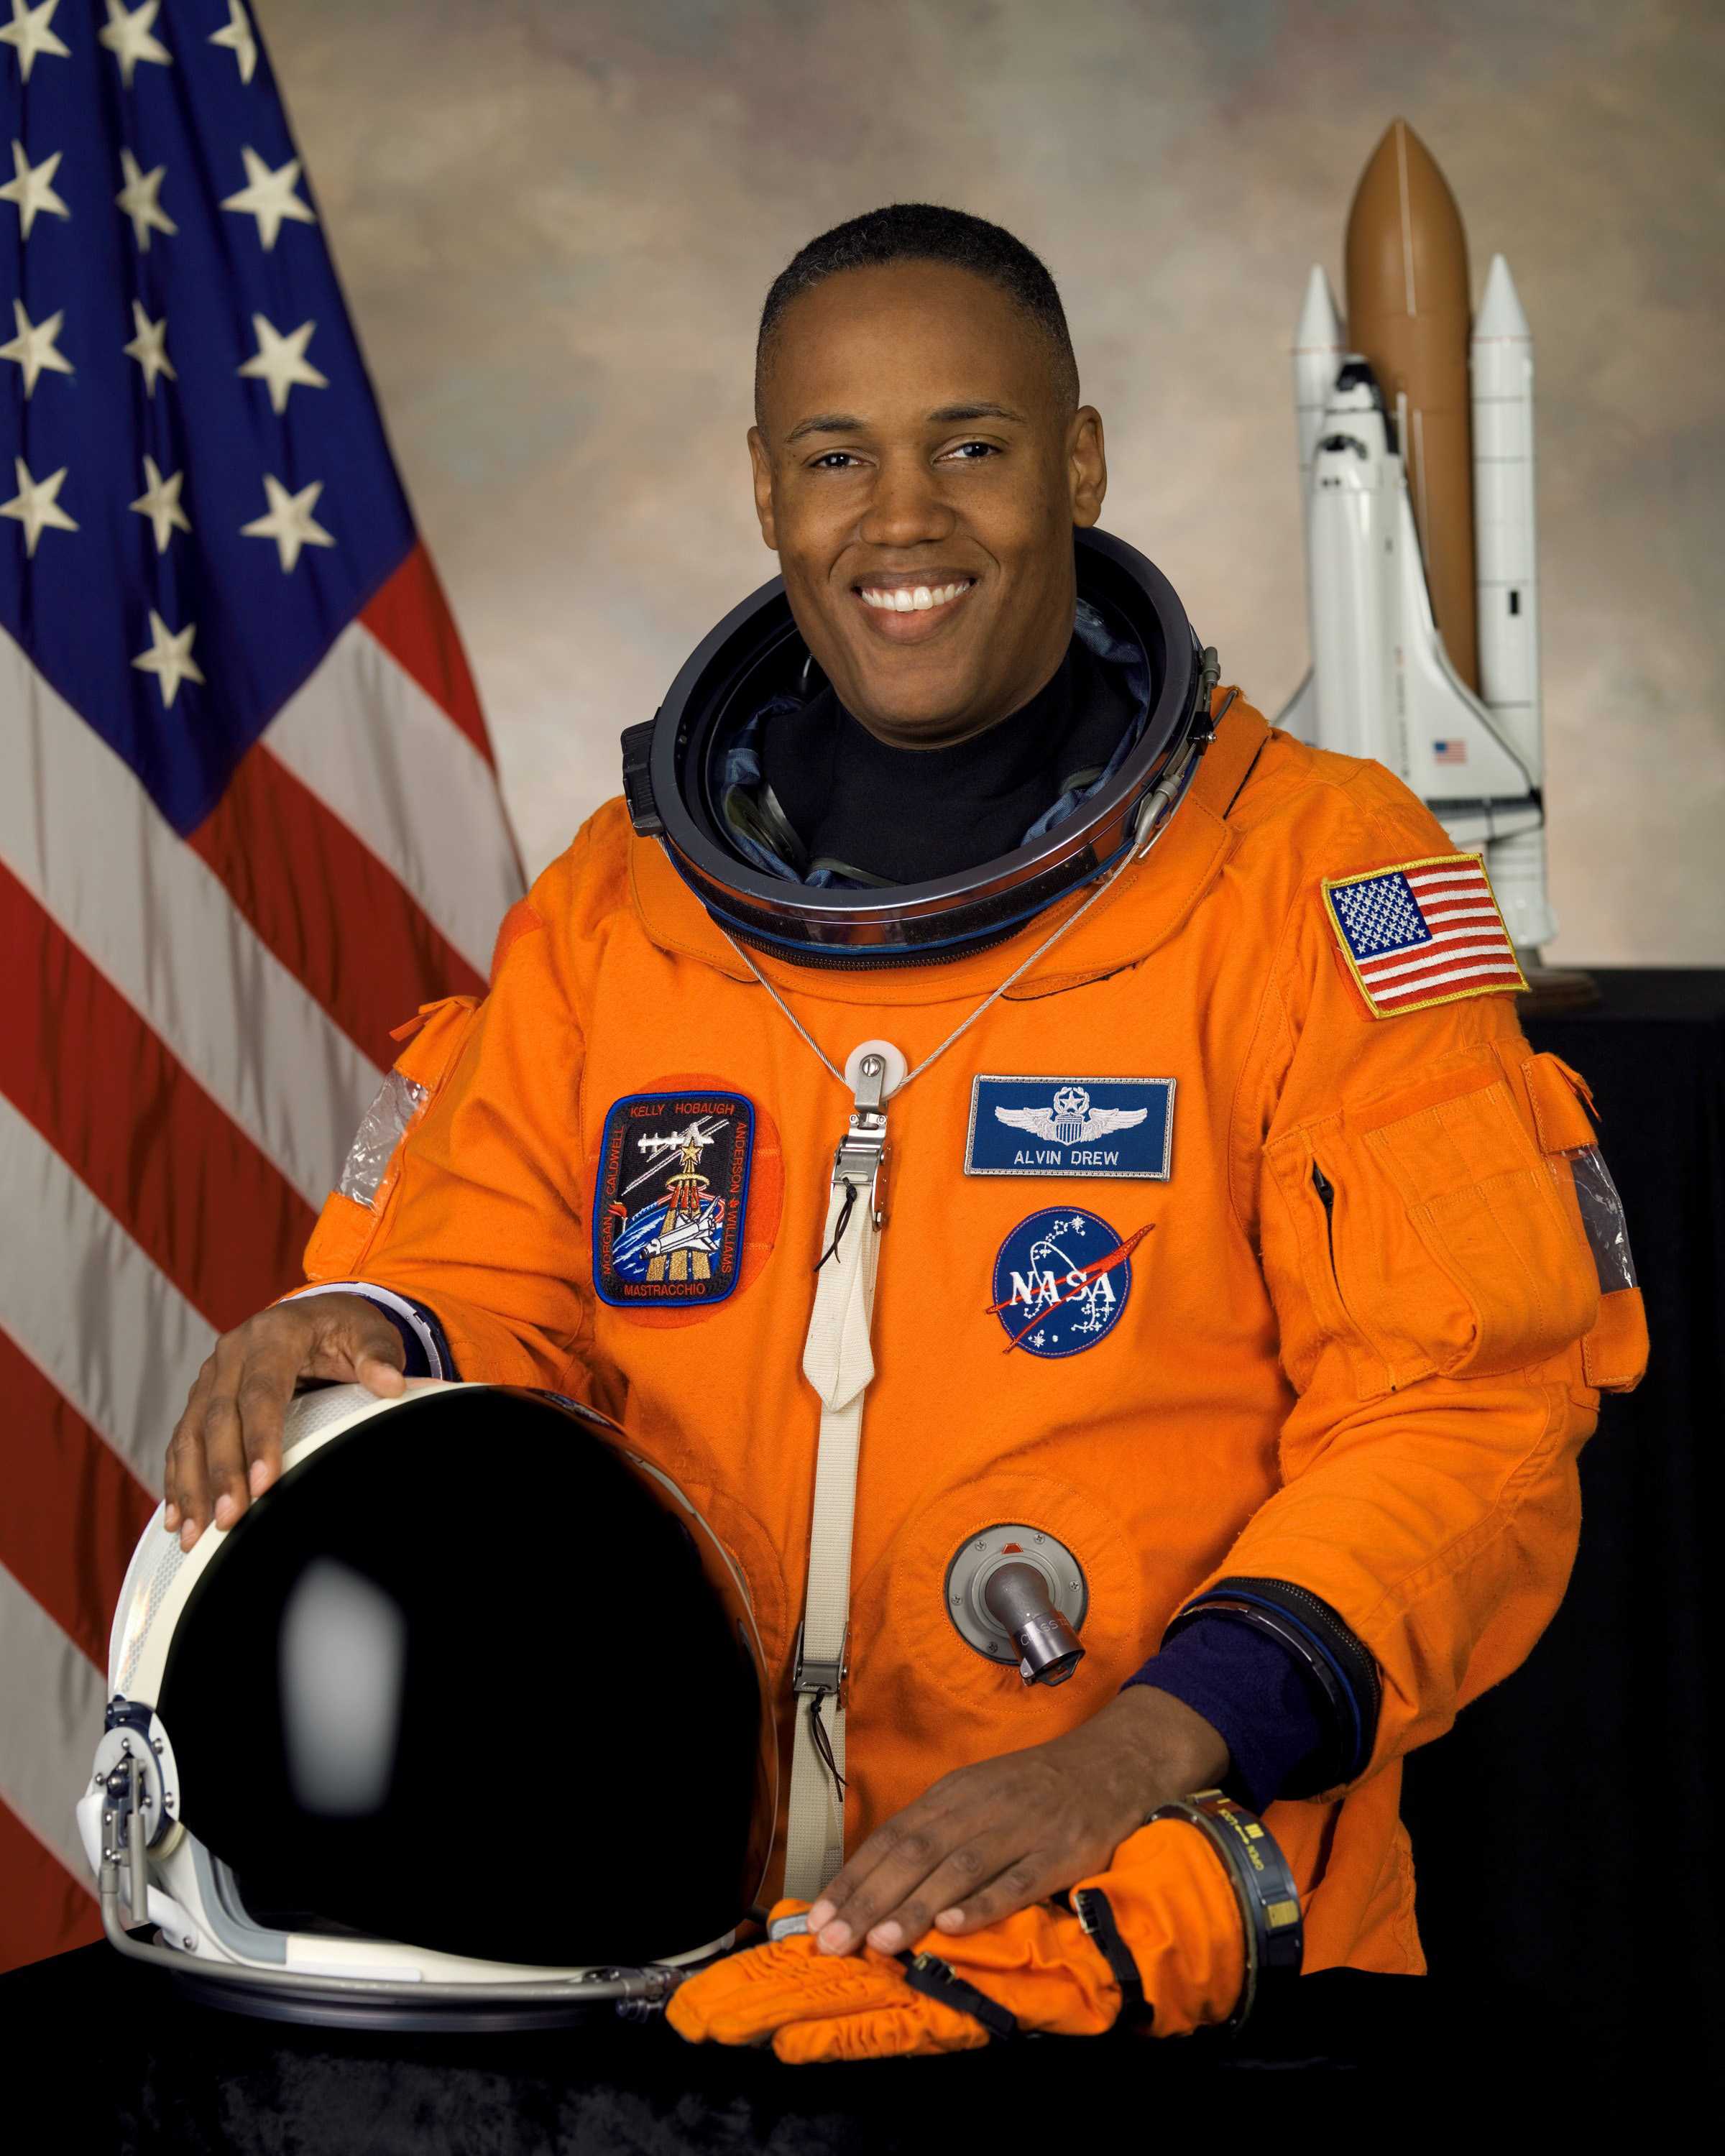 Drew is wearing an orange space suit with a helmet resting on the table in front of him while he smiles for his portrait.